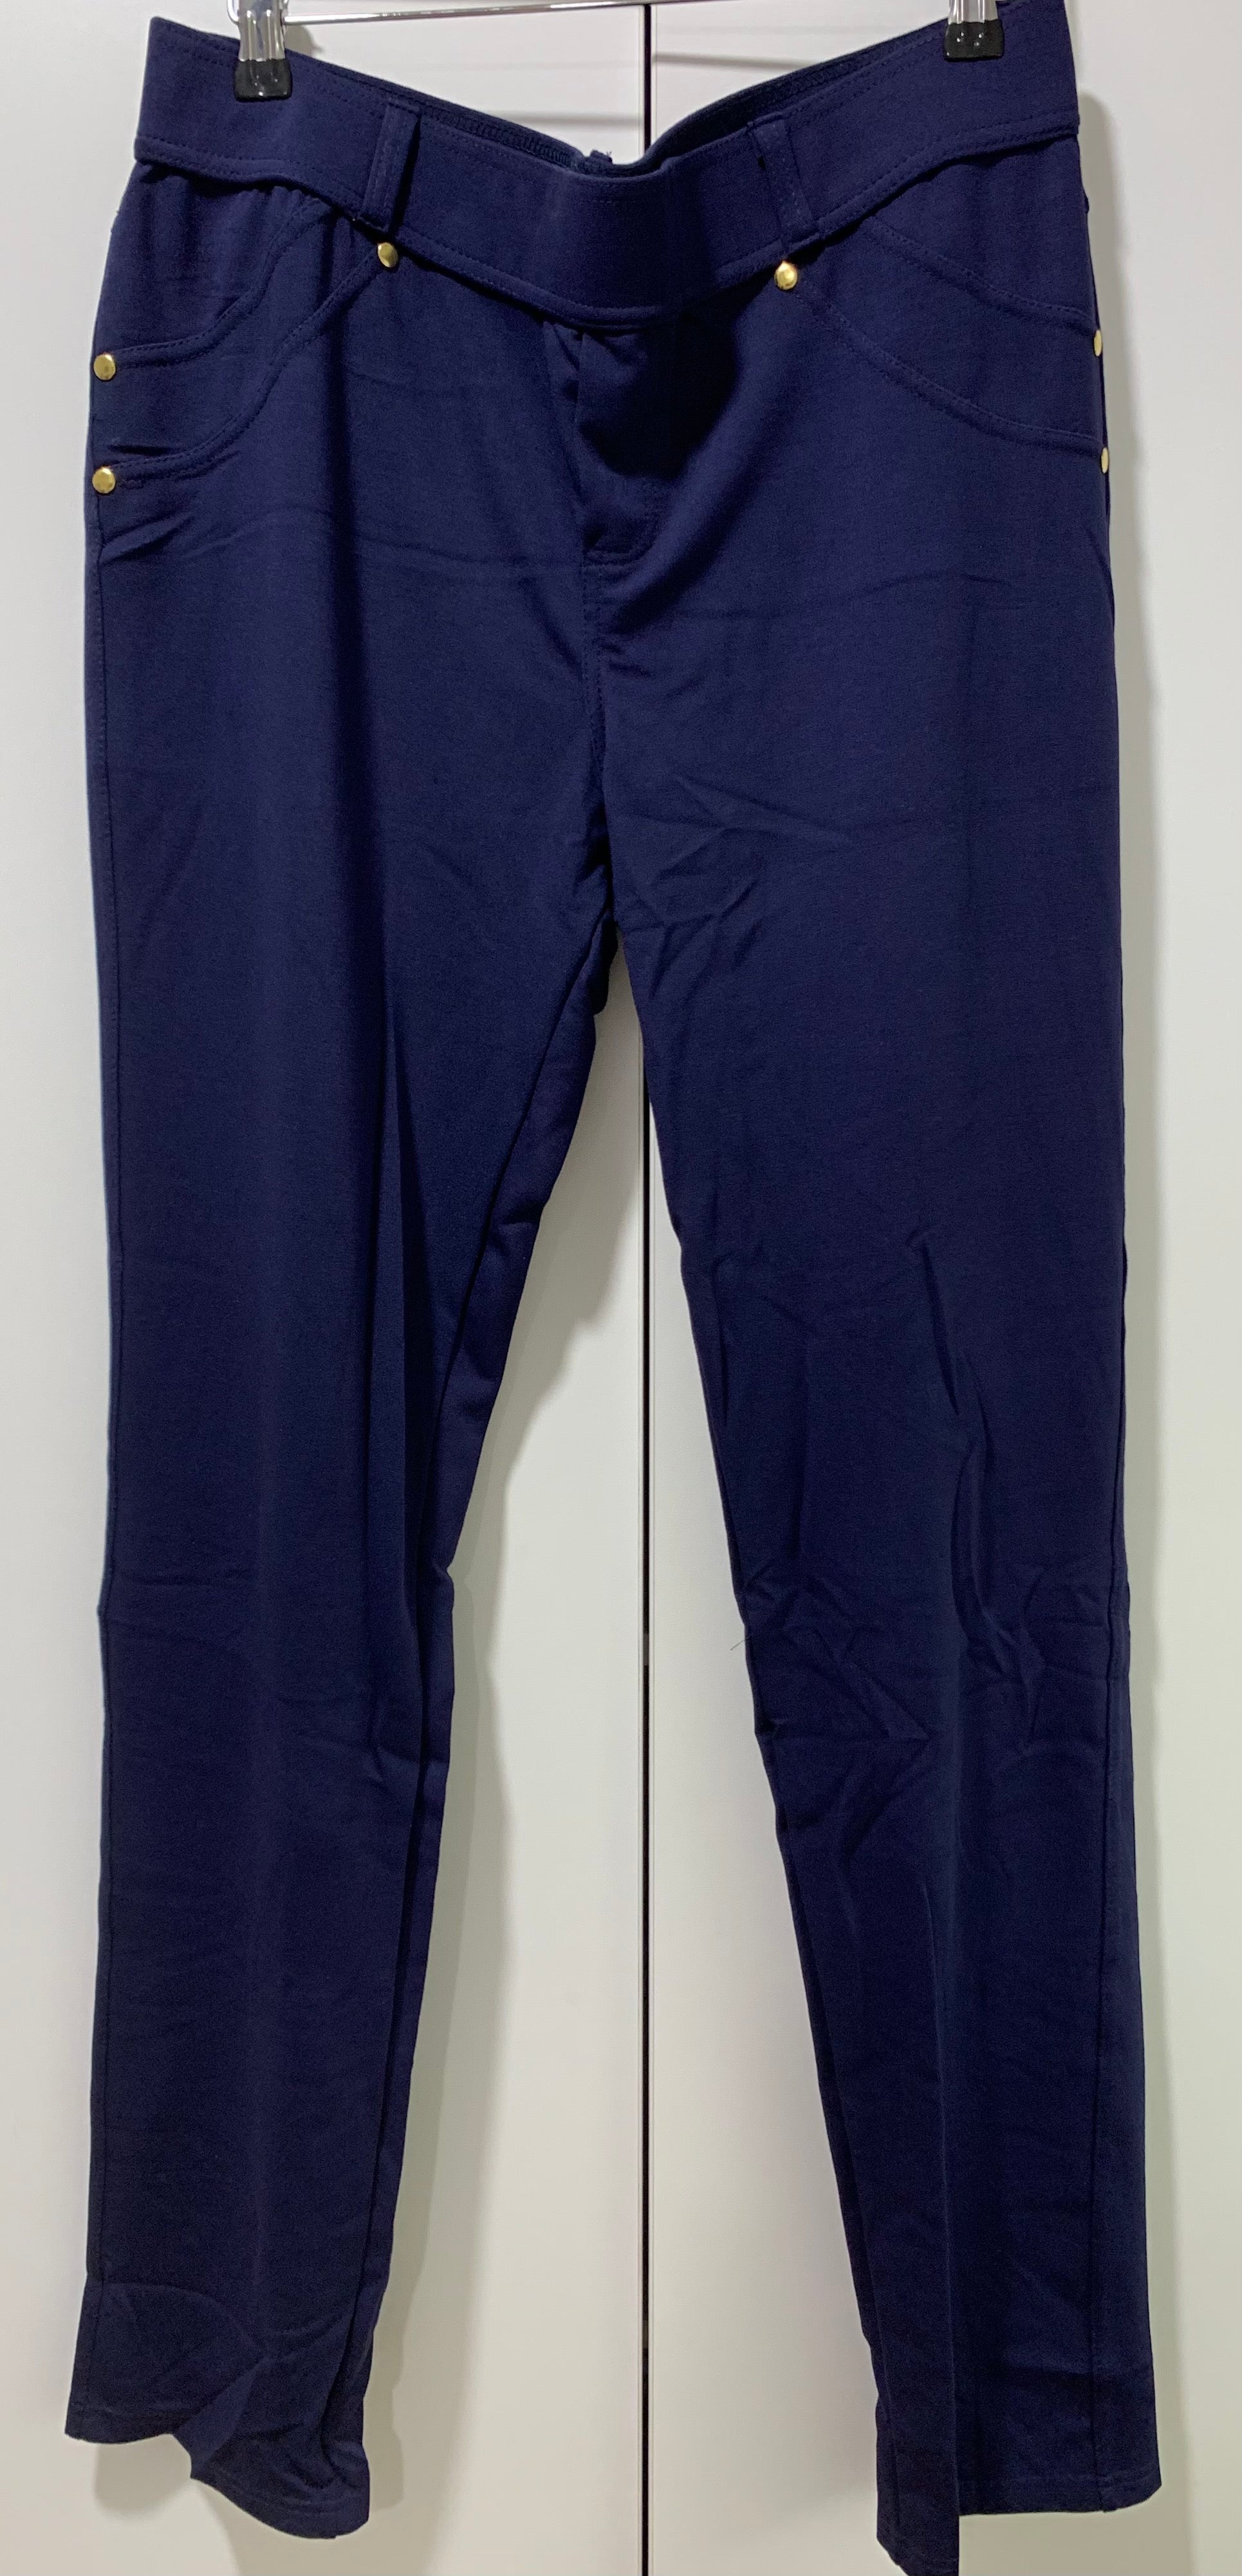 Pants with Four Way Stretch Super Elastic in Navy Blue with Gold Detail